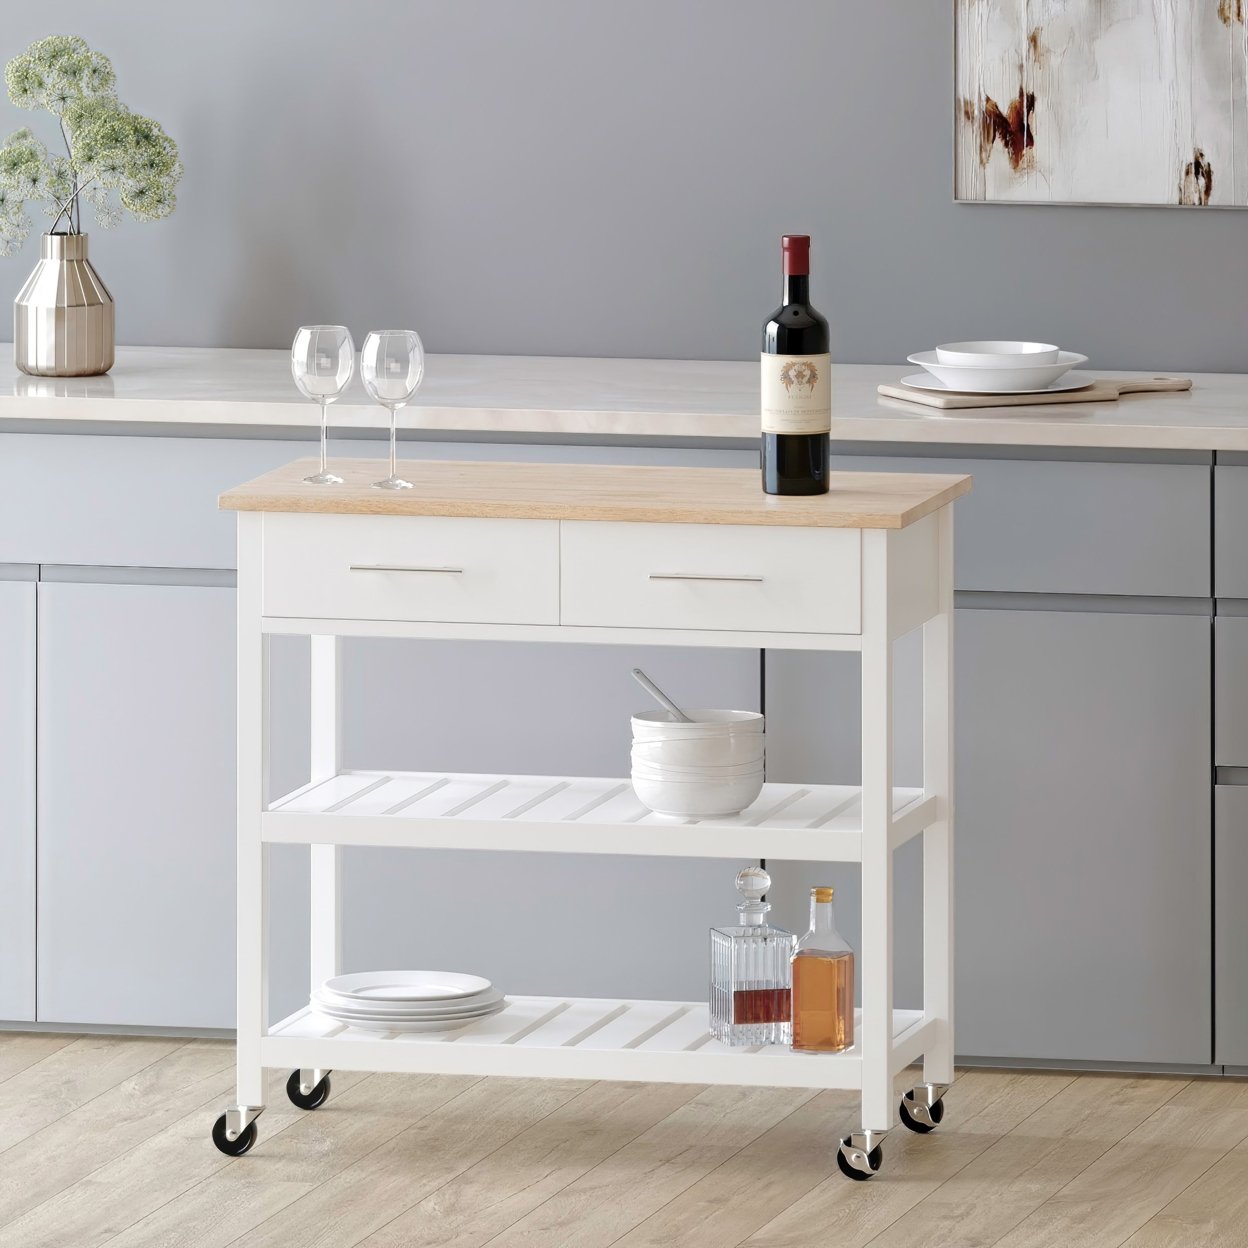 Enon Contemporary Kitchen Cart With Wheels - White/natural